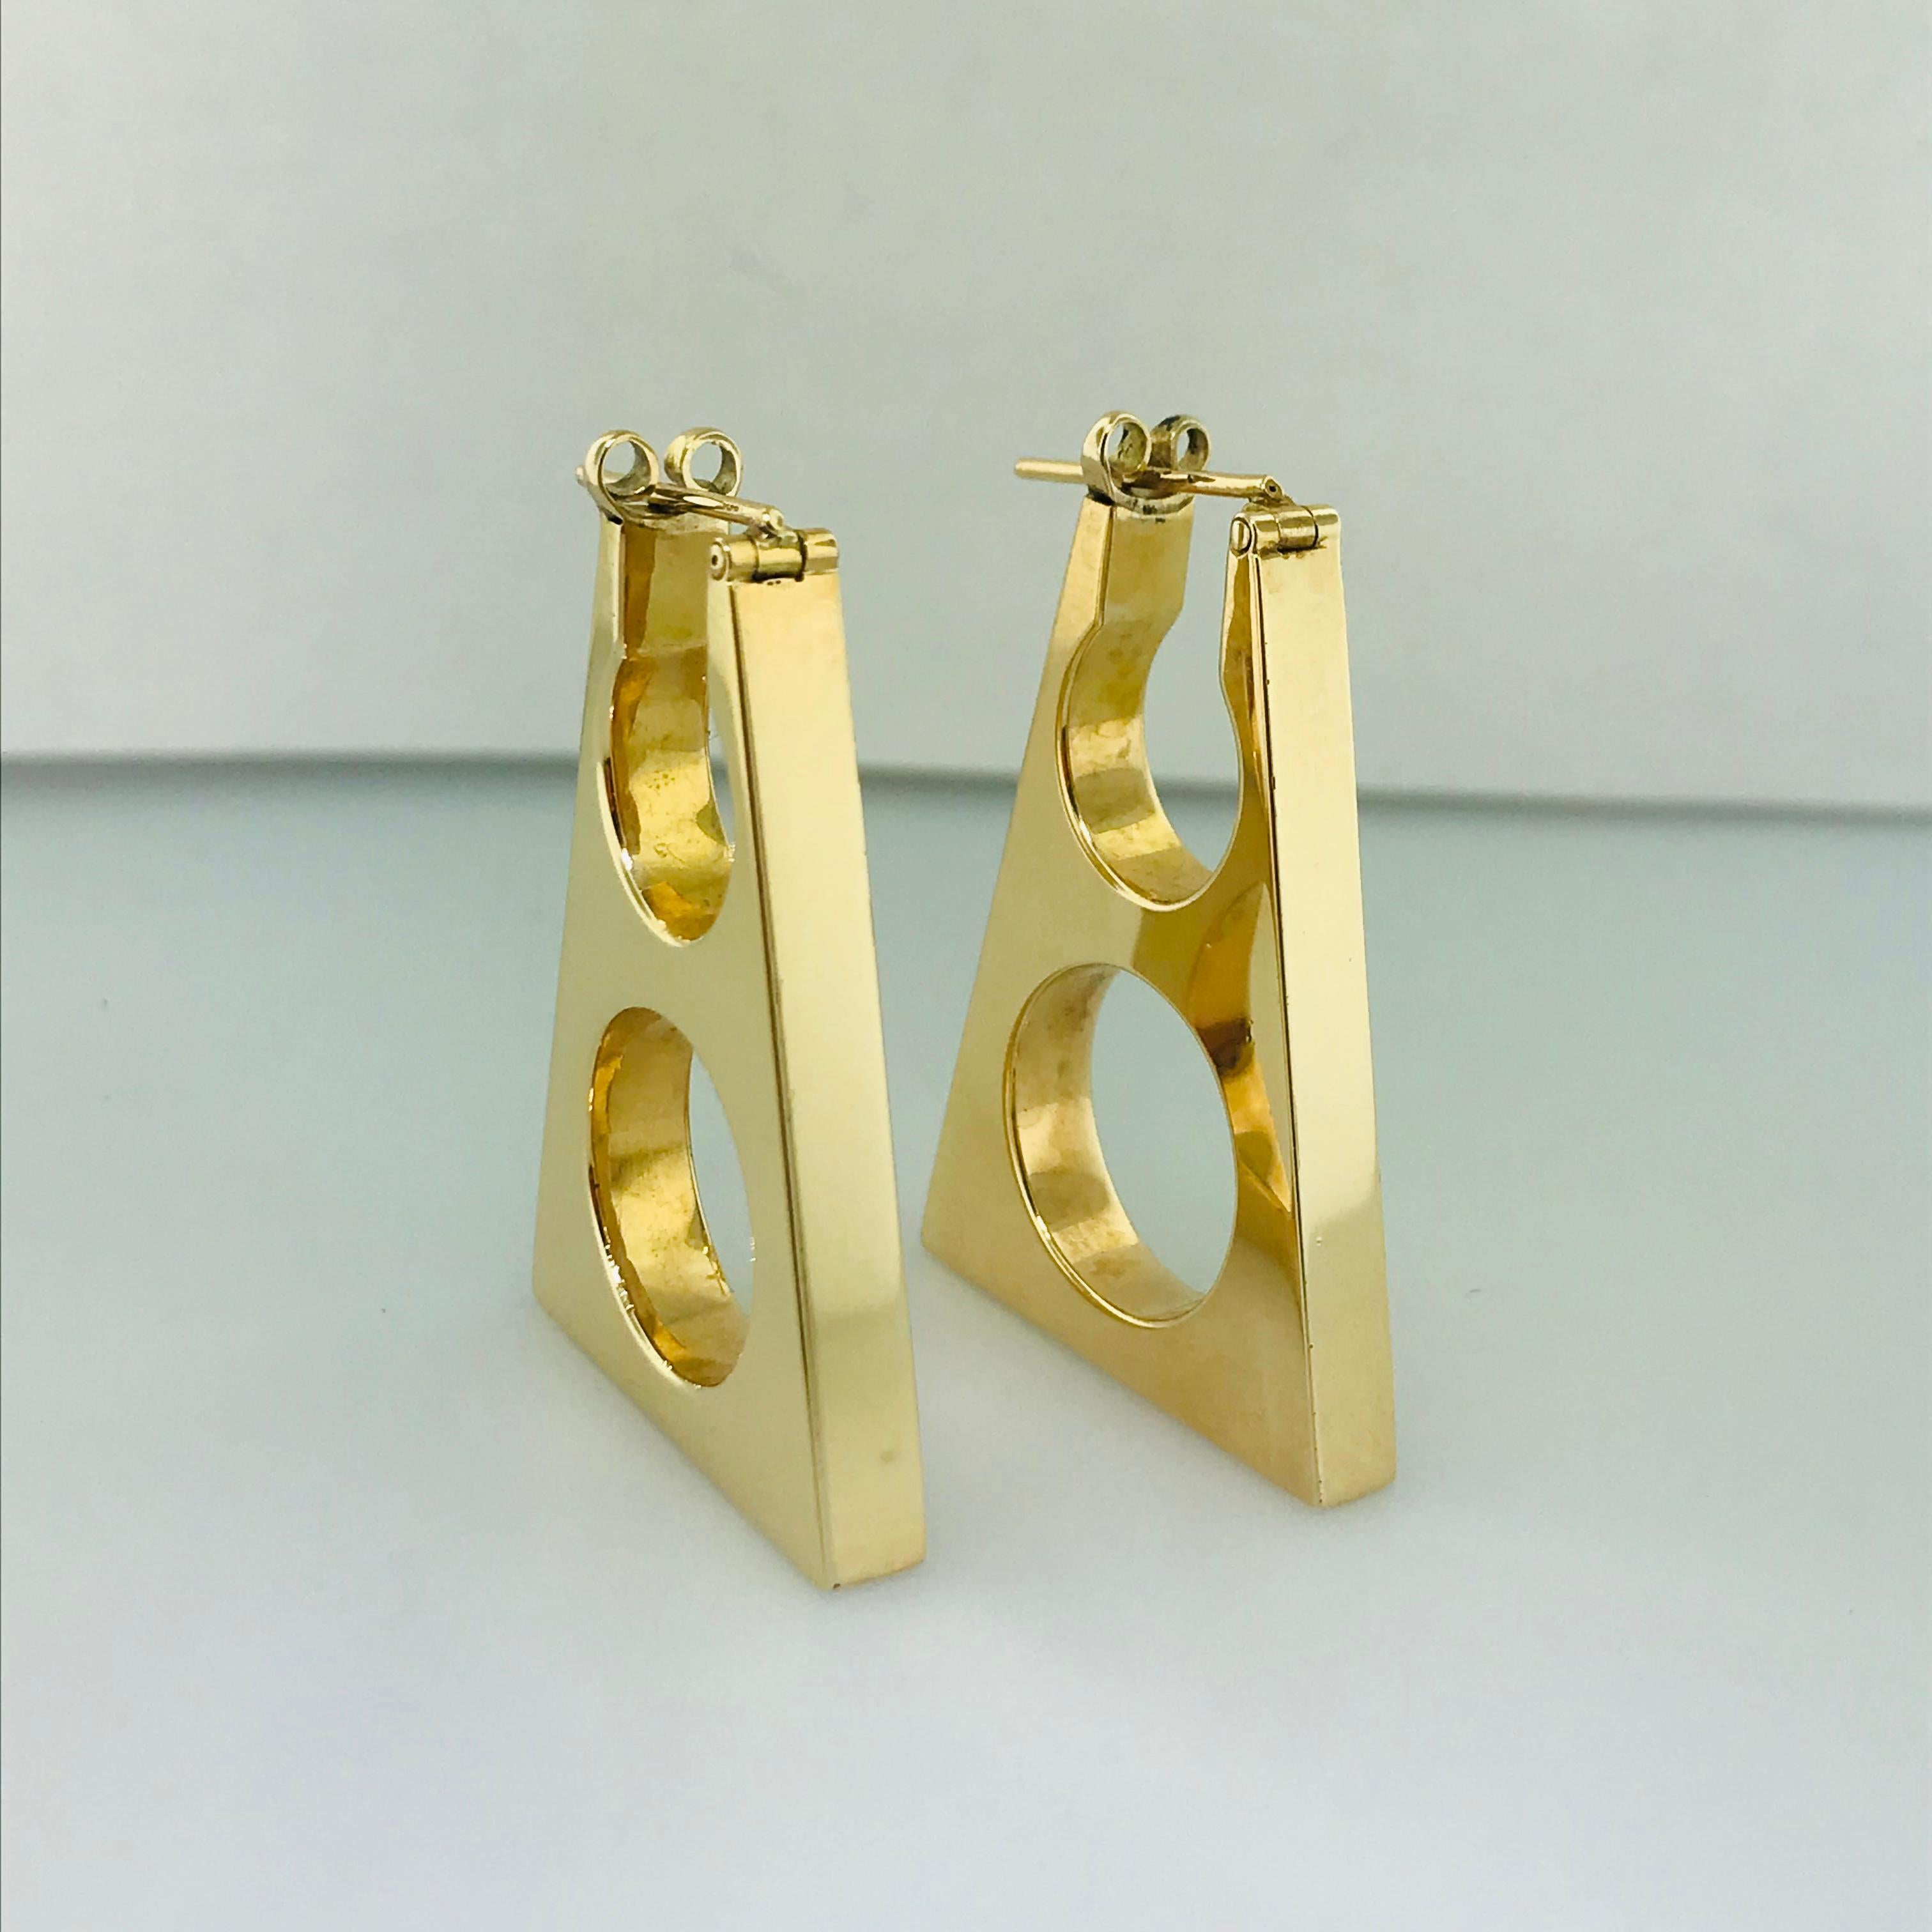 How cool are these! These lightweight 14 karat gold geometric earrings are vintage and fun. With triangular/trapezoid shape this earrings are 1 1/2 inch long and 3/10 inch wide. There is a cut out circle at the bottom that is 1 inch wide and a